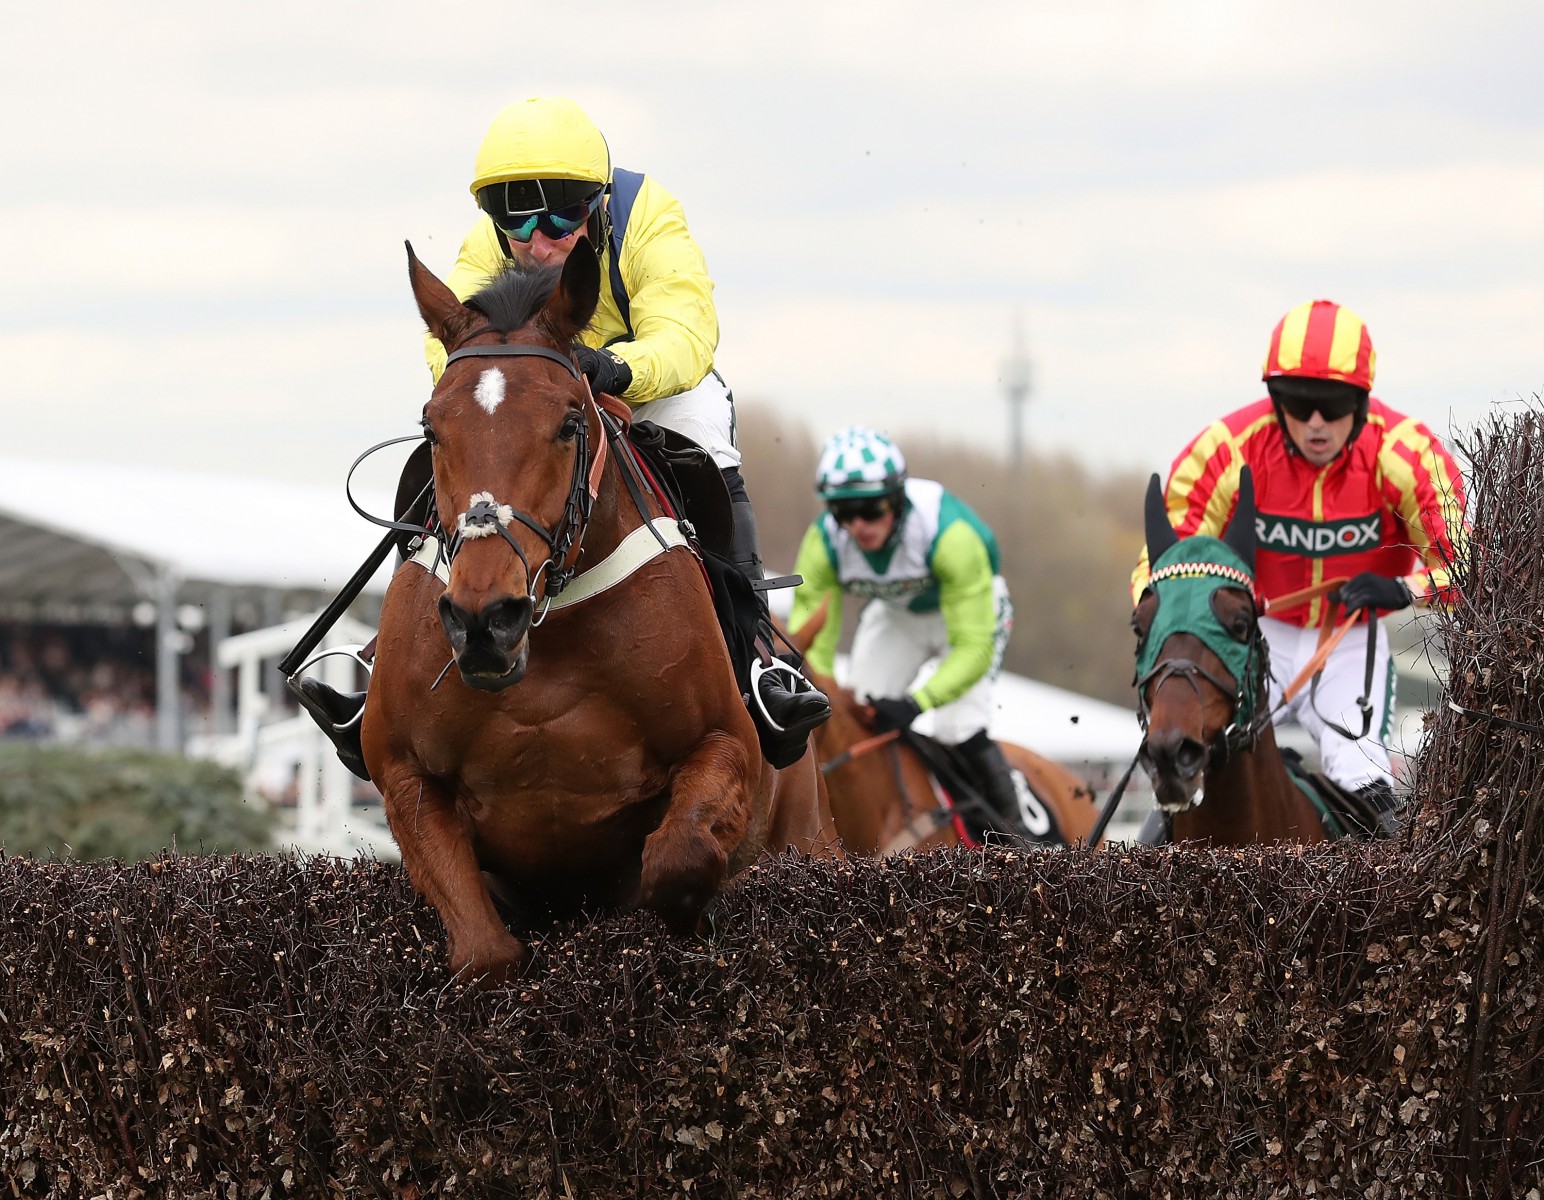 , Haydock Betting Preview: Tip, racecard and analysis for the Grade 1 Betfair Chase at Haydock this Saturday